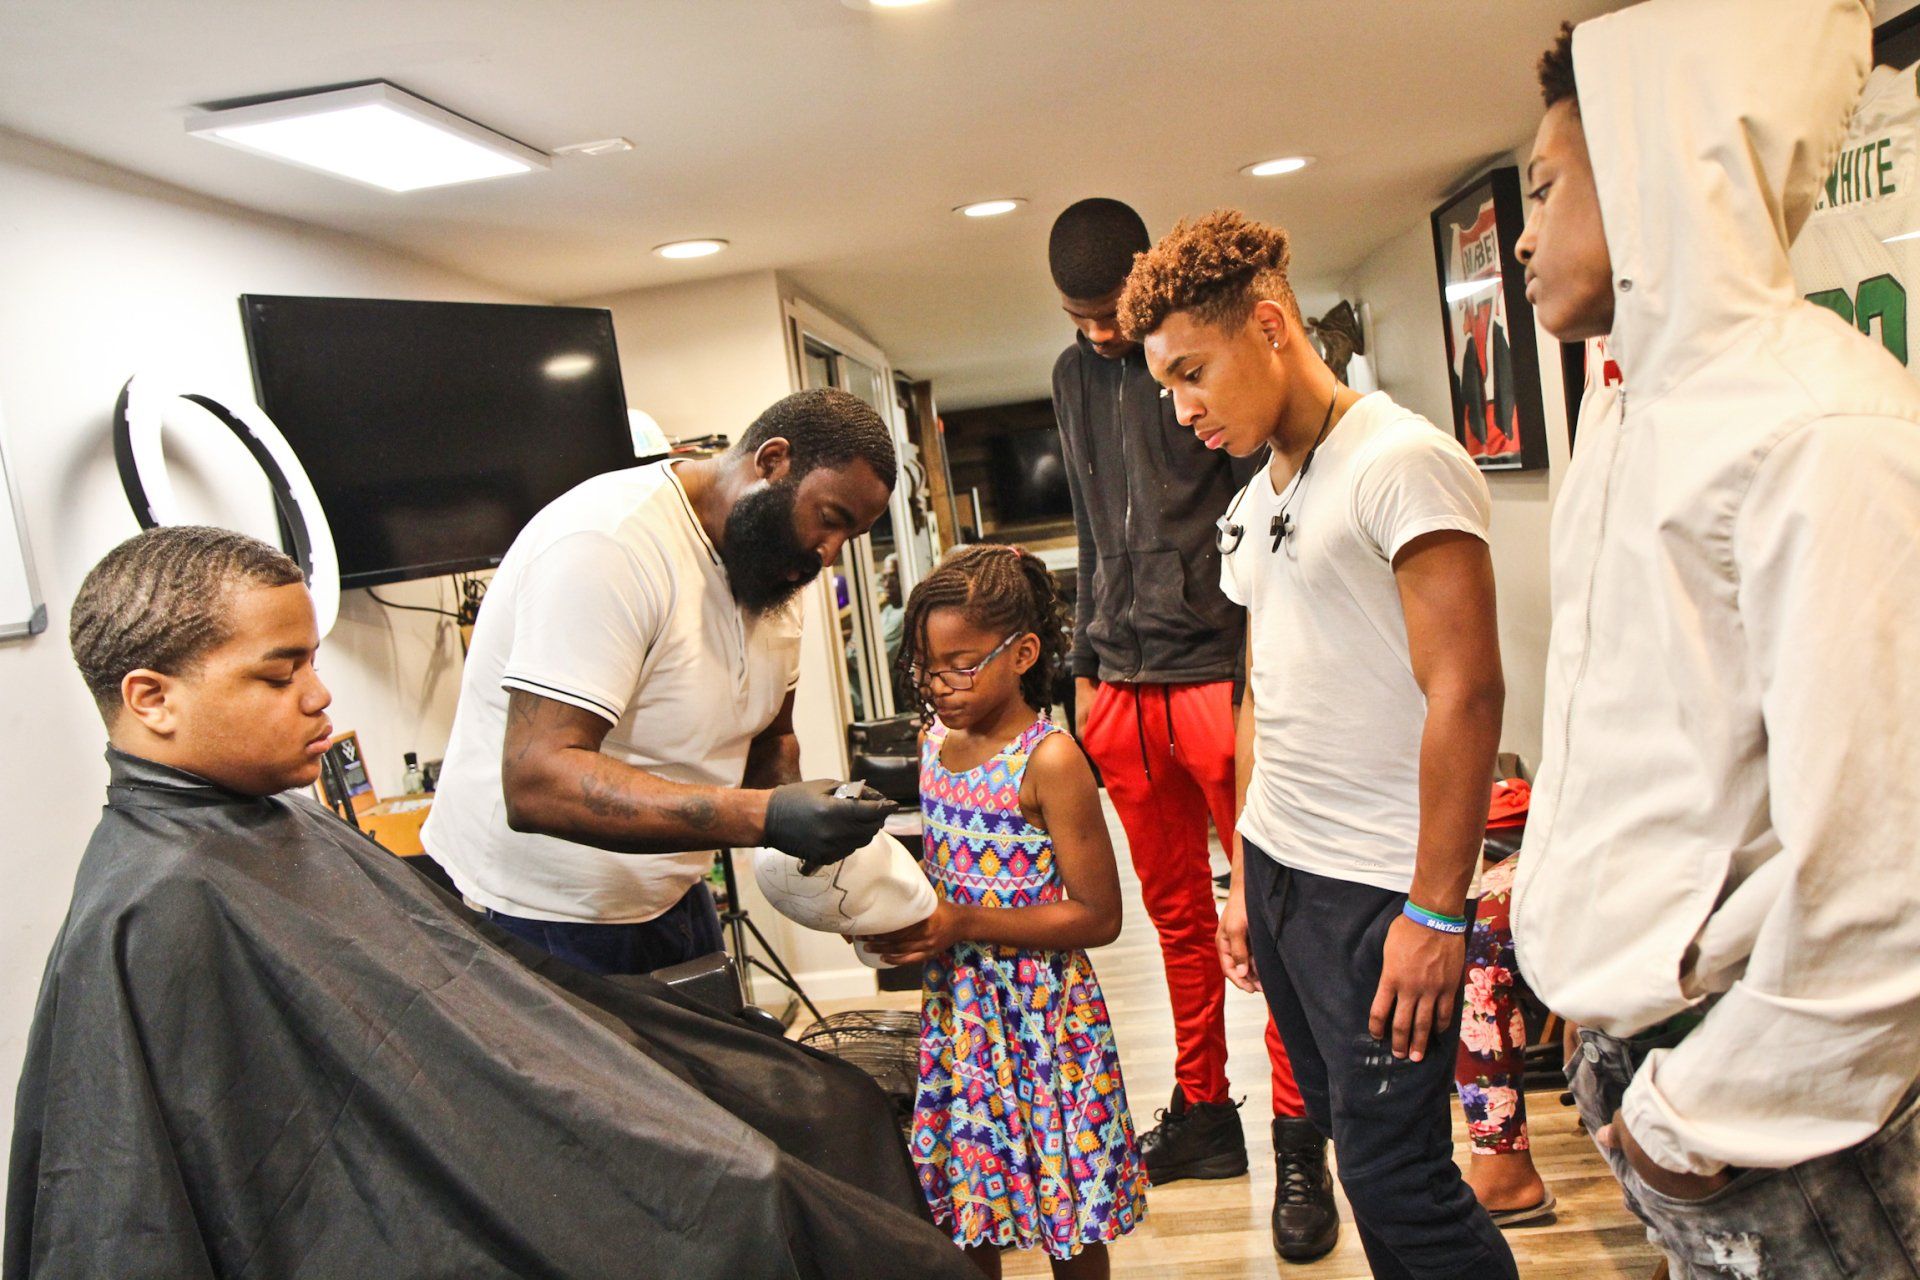 Junior Barbering Academy teaches kids the clips of the trade. Neijae Graham-Henries, 8, volunteers her services to the homeless in her community, setting the world record for being the World's Youngest Barber, according to the World Record Academy.